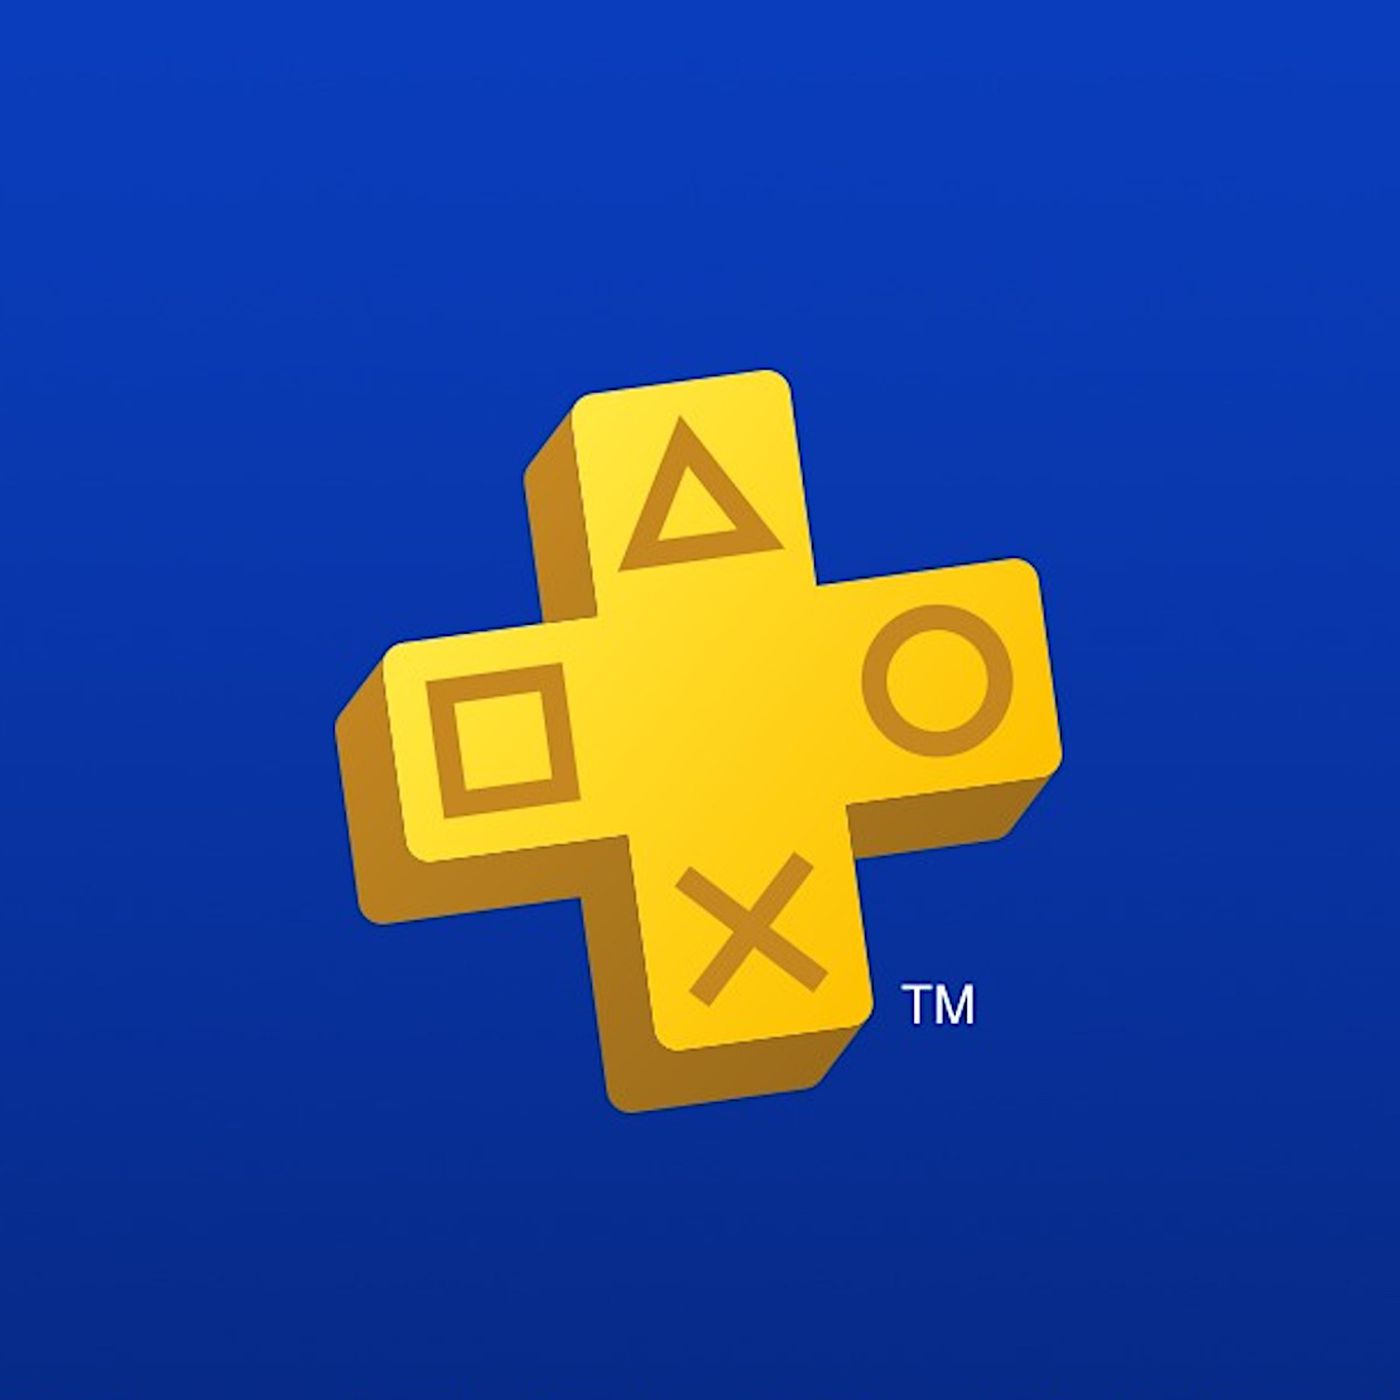 Sony announces new PlayStation Plus Extra and Premium tiers, adds Now streaming - Polygon